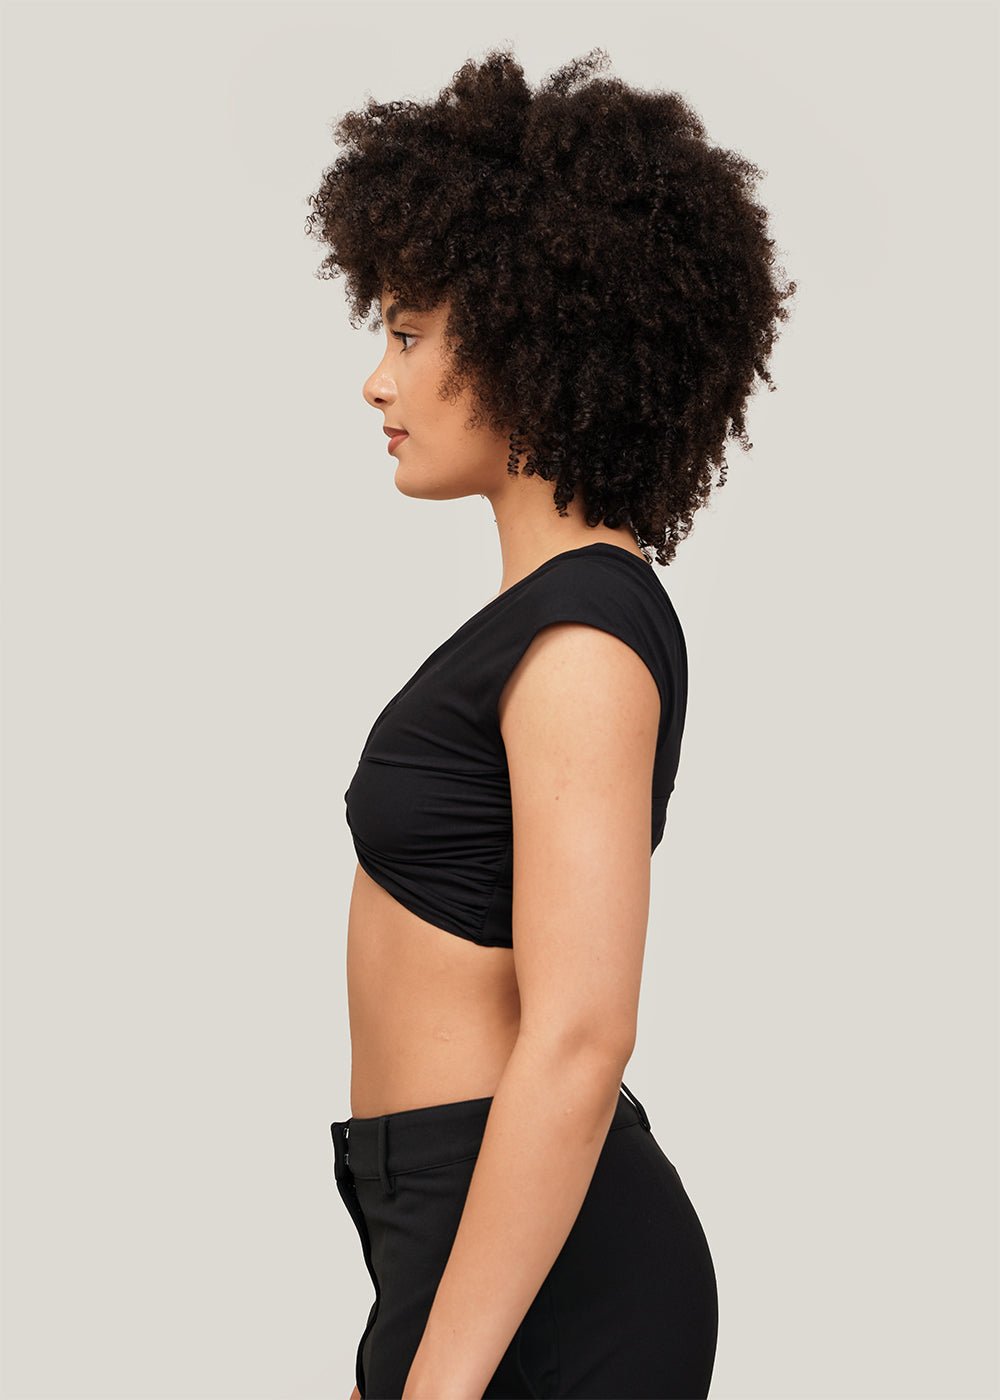 Beaufille Crosby Crop Top - New Classics Studios Sustainable Ethical Fashion Canada